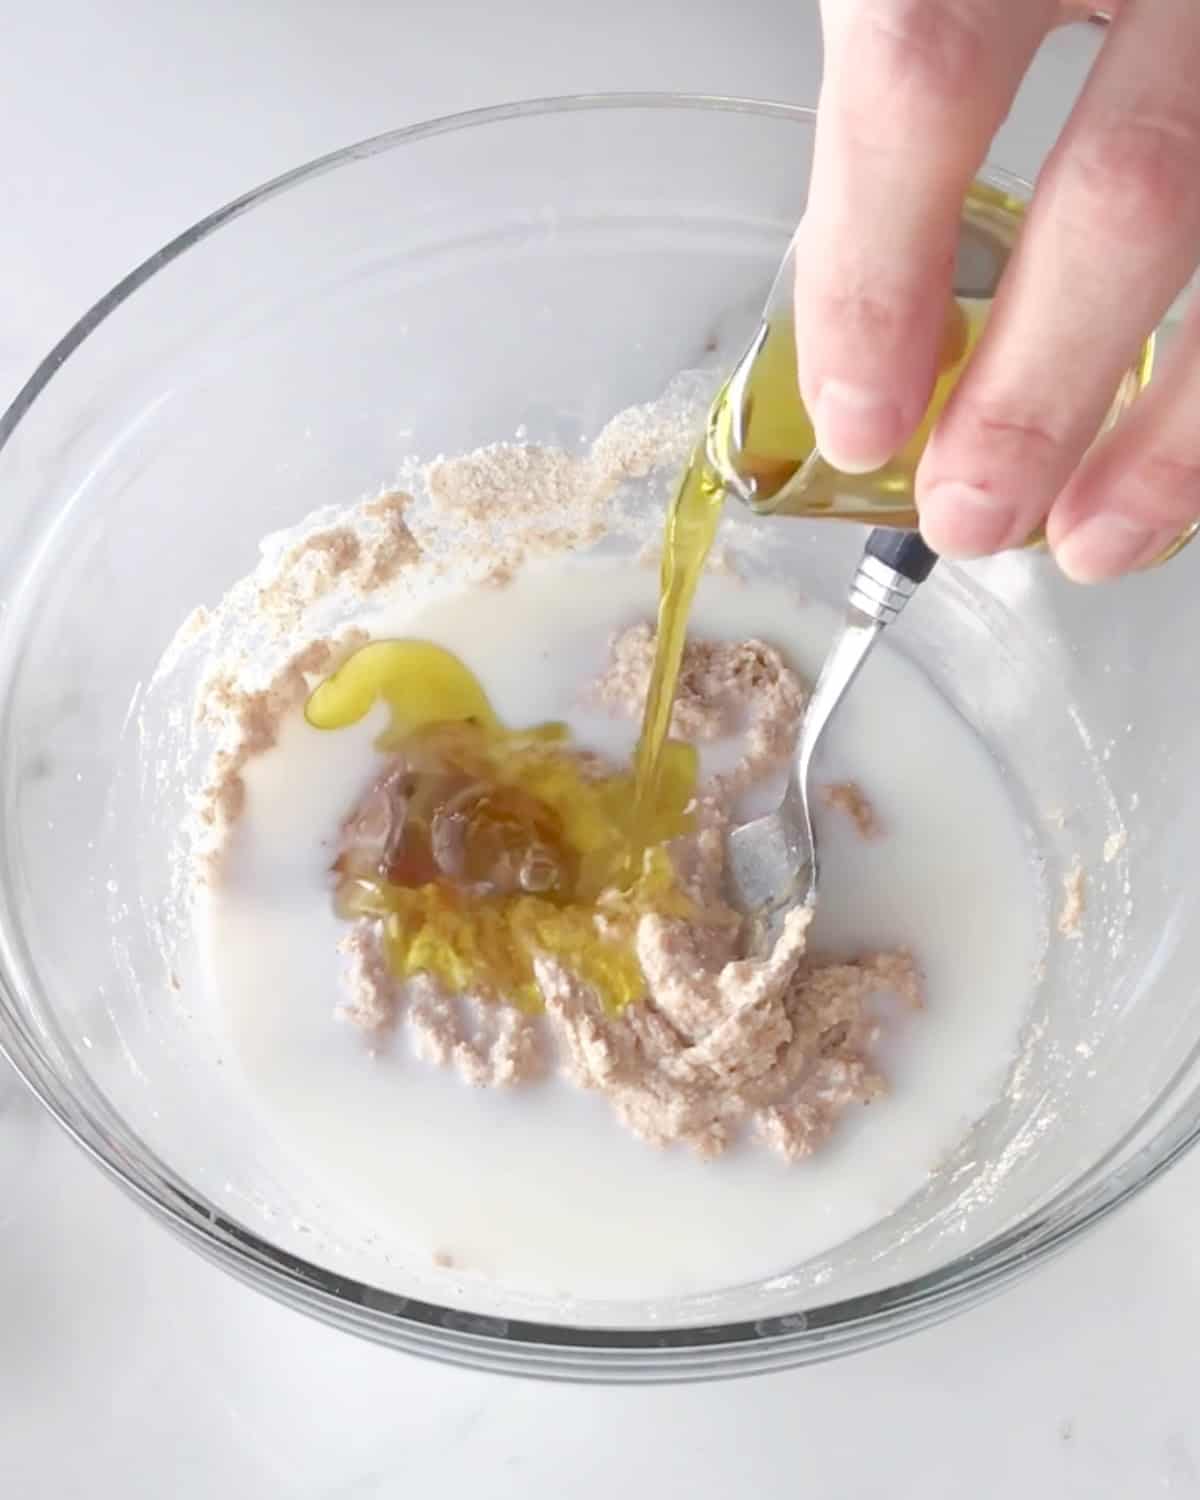 Milk and oil added to whole wheat dough in a glass bowl. White marble surface.